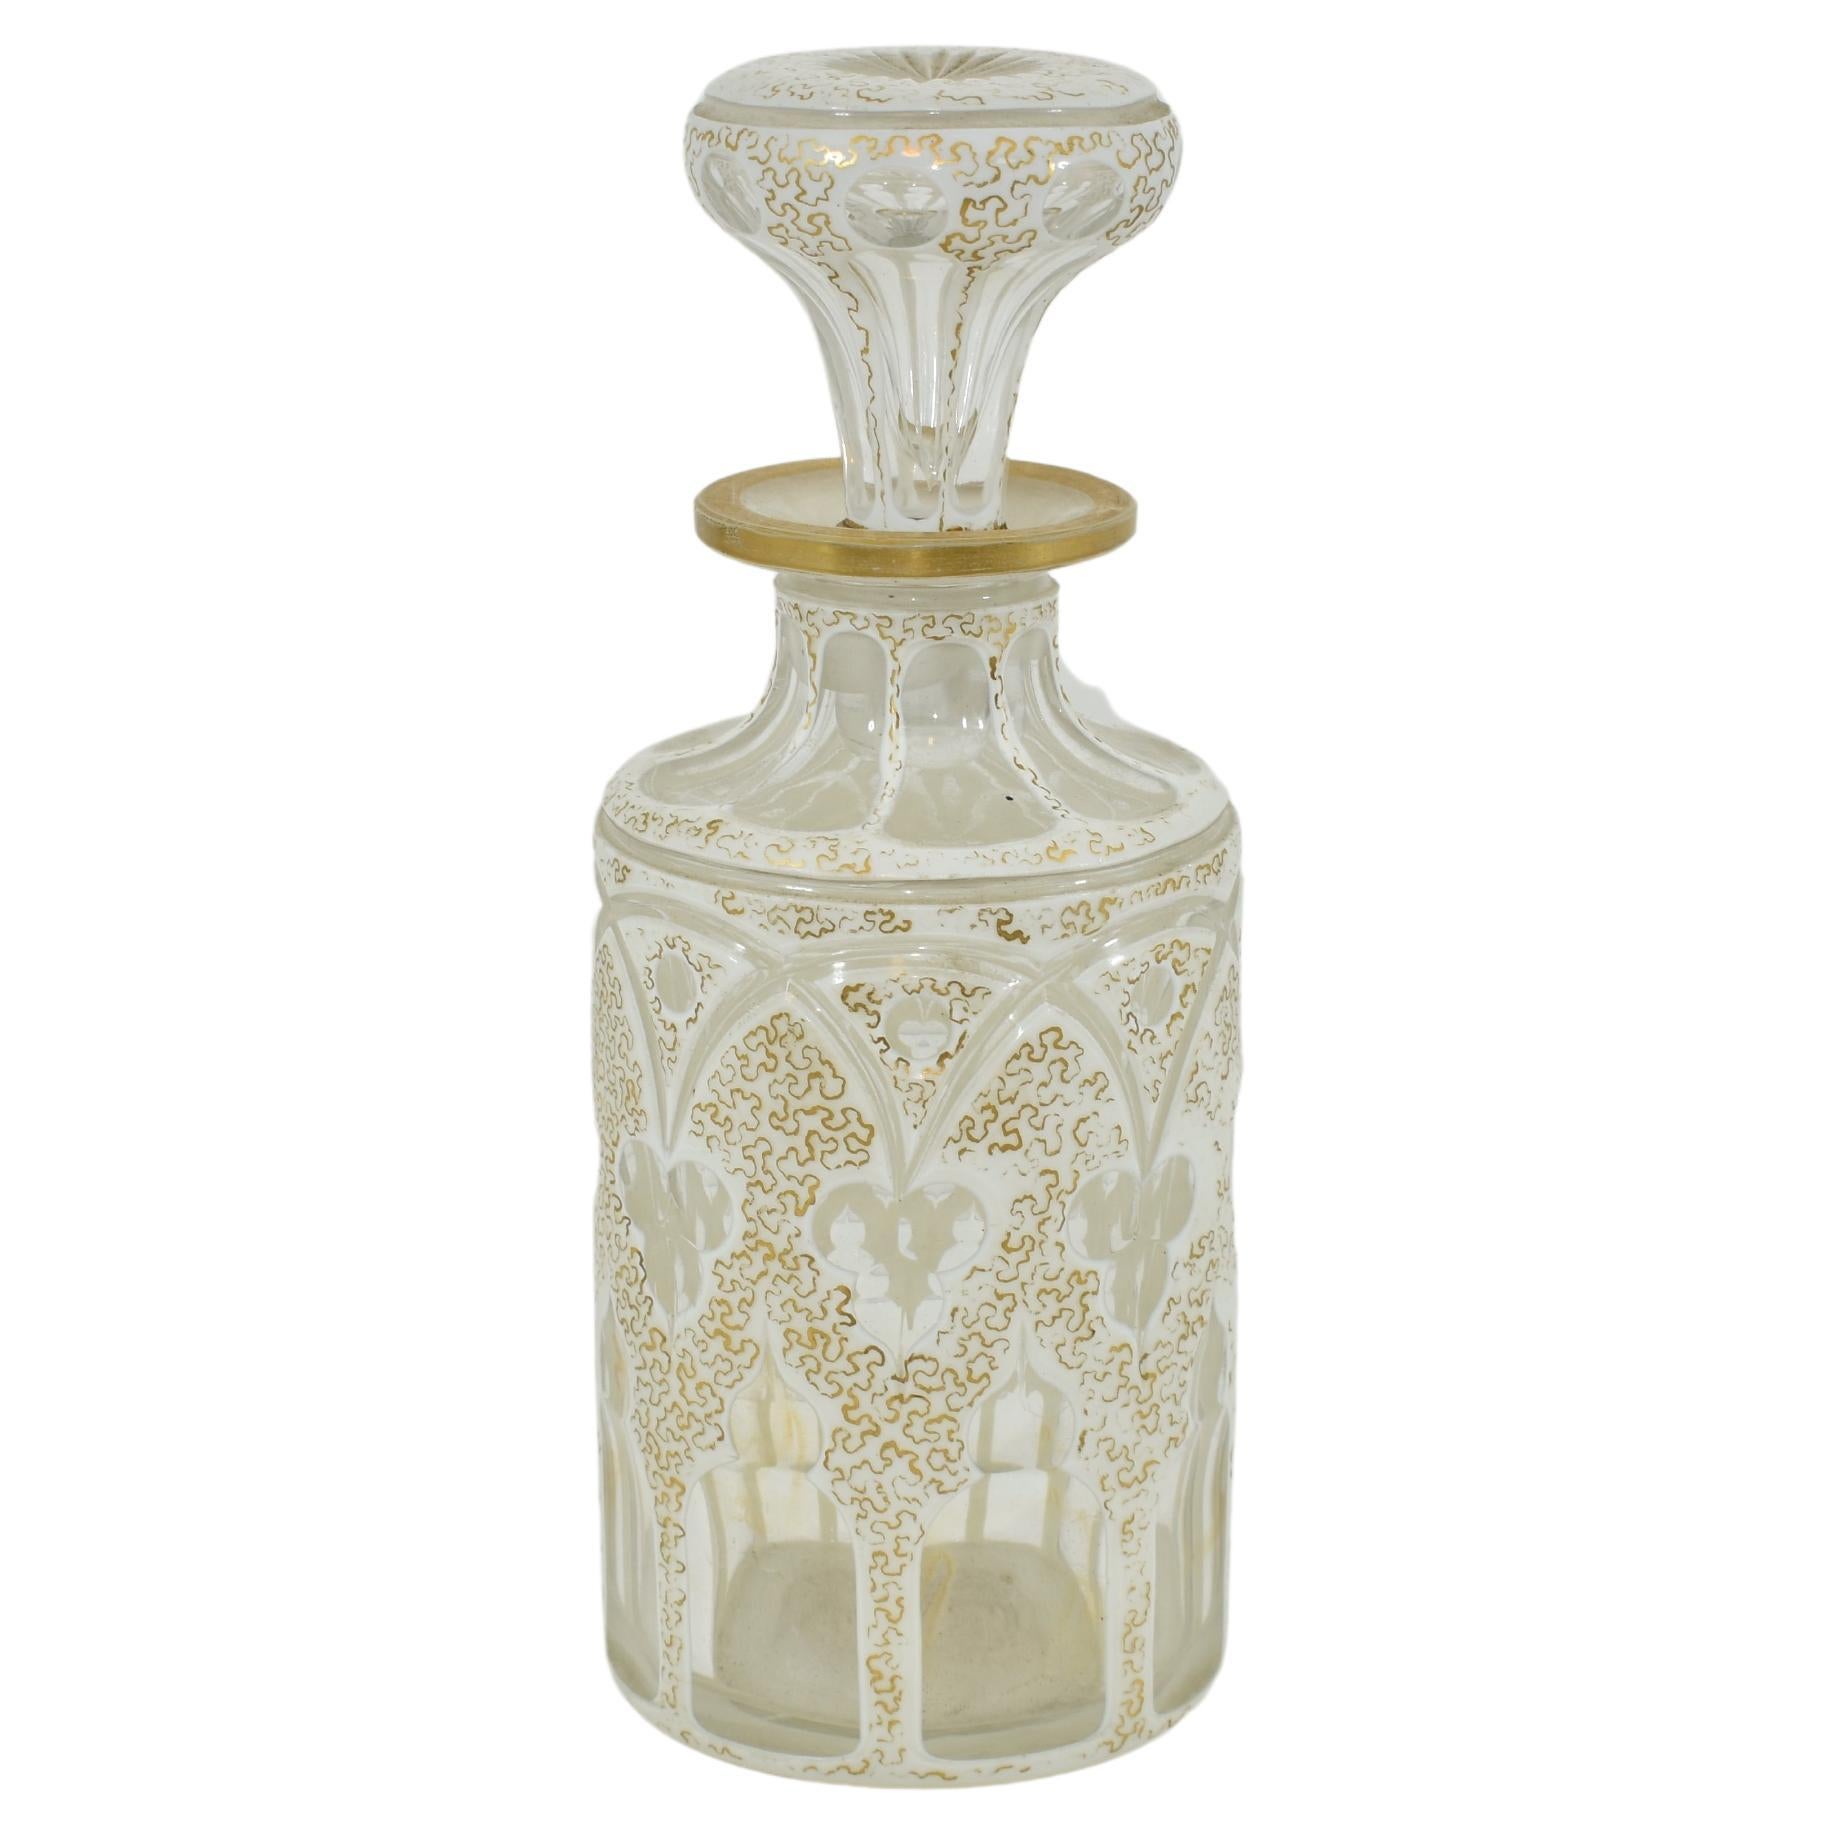 Antique perfume bottle with stopper
transparent glass with milky white cut opaline glass overlay
hand-painted all arround with gold enamel decorations
Bohemia, 19th century.